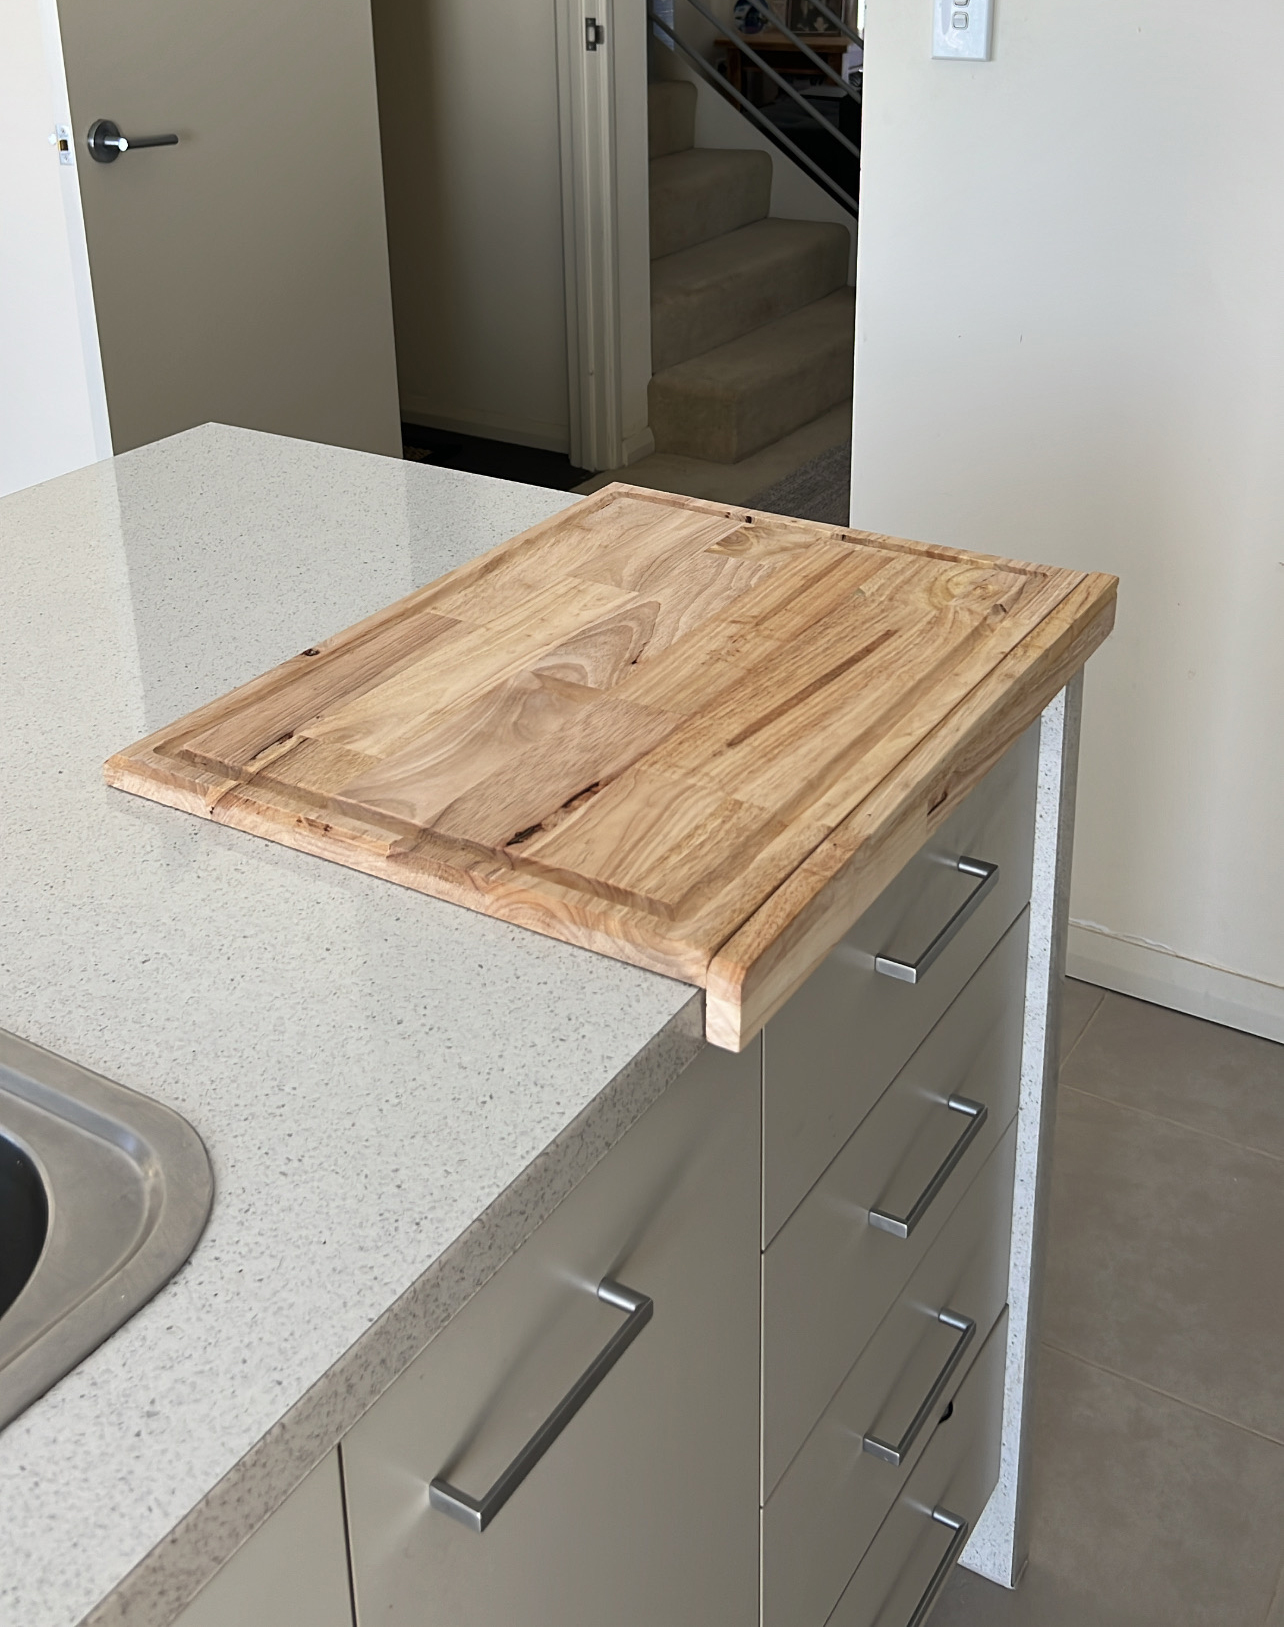 Finished DIY Chopping Board on kitchen bench